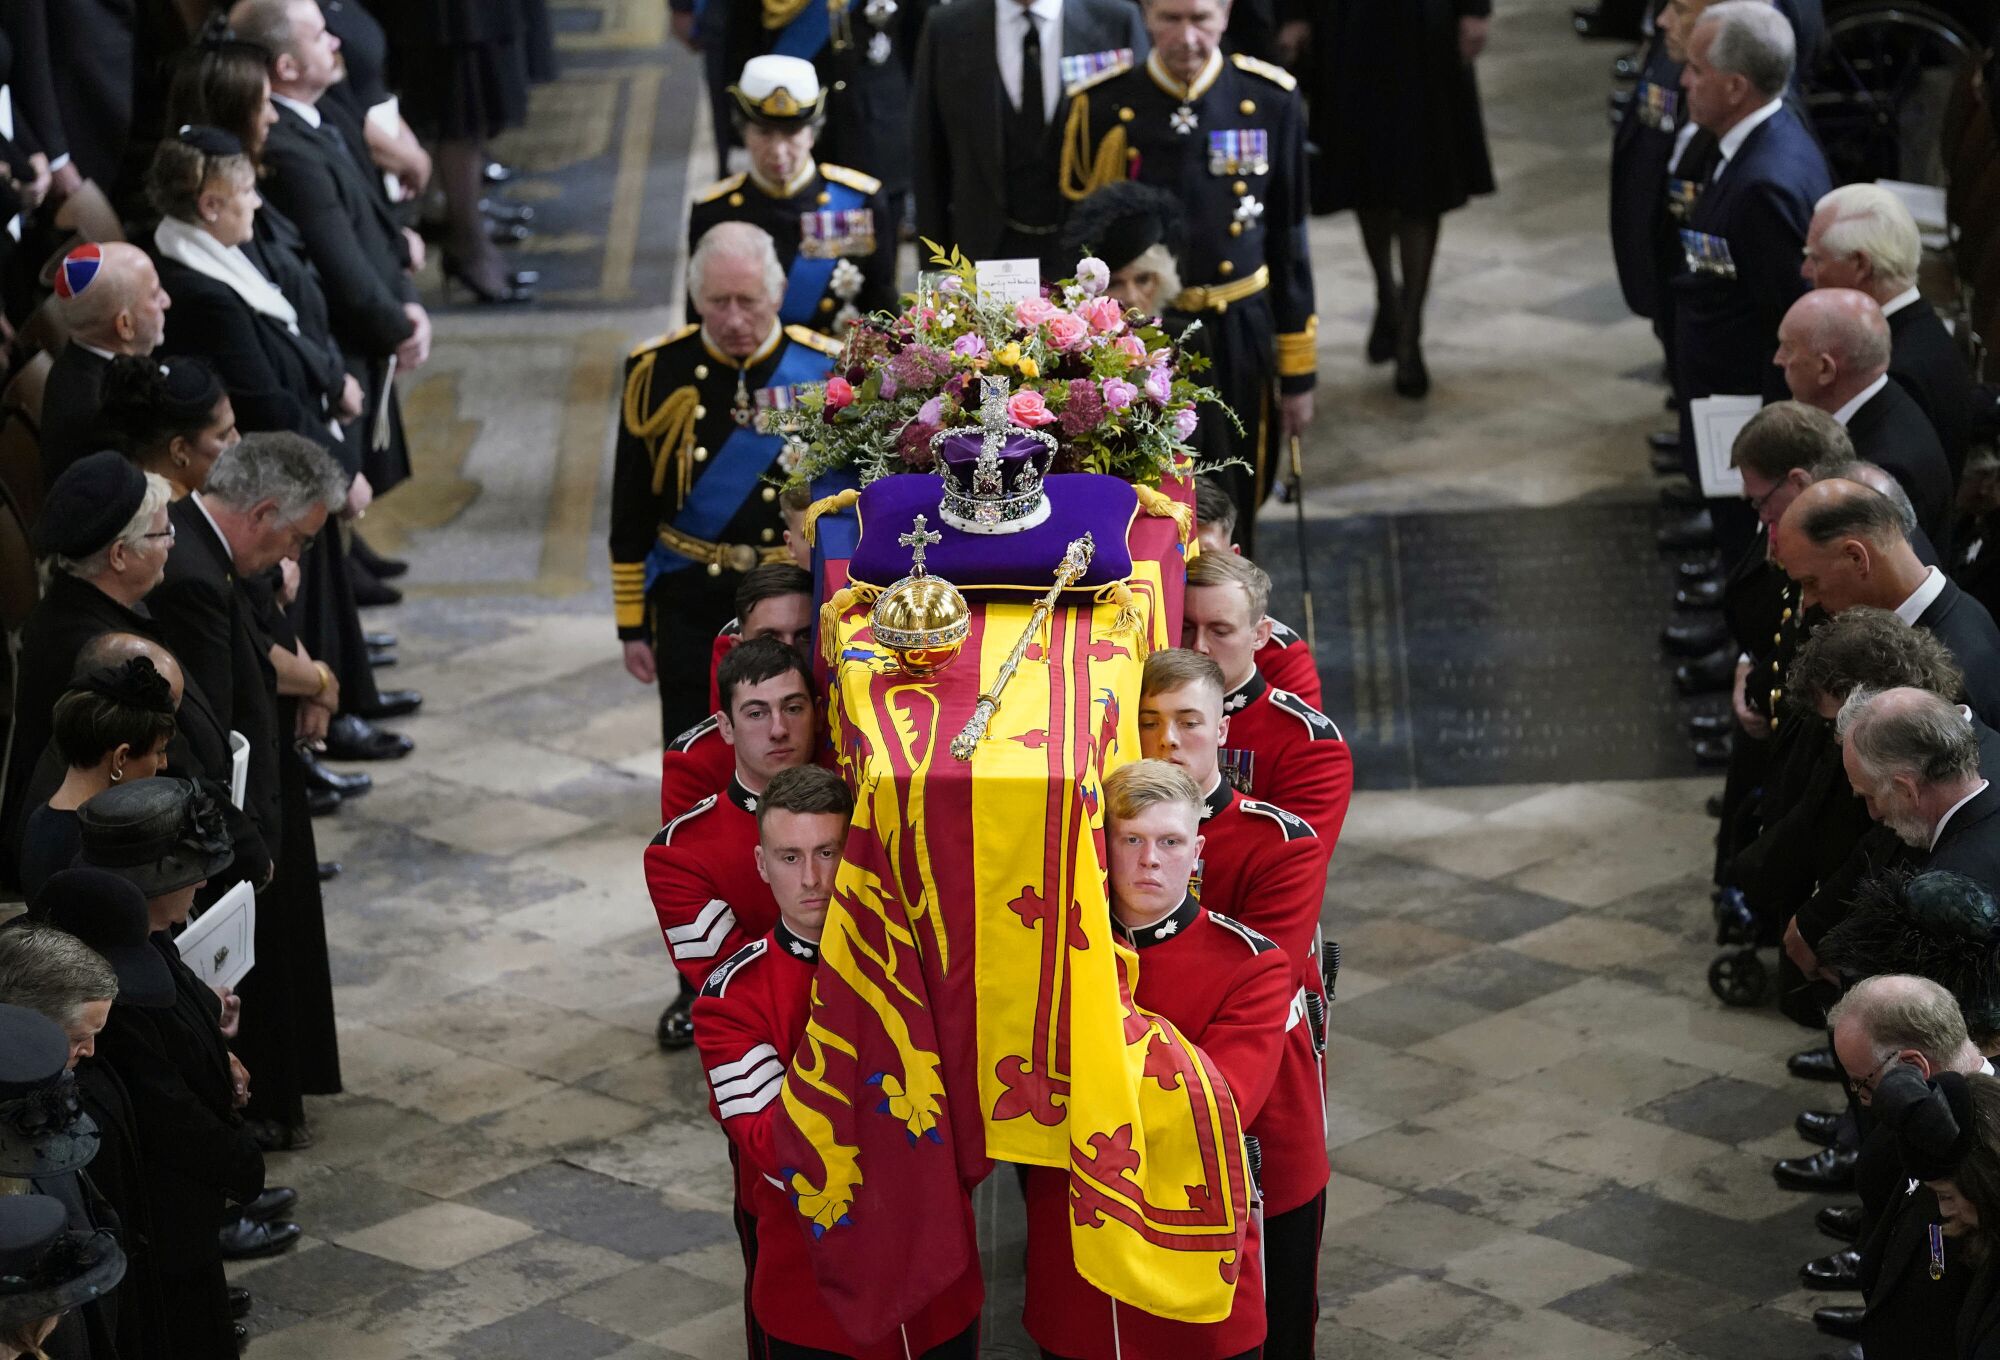 The royal family follows behind the coffin.